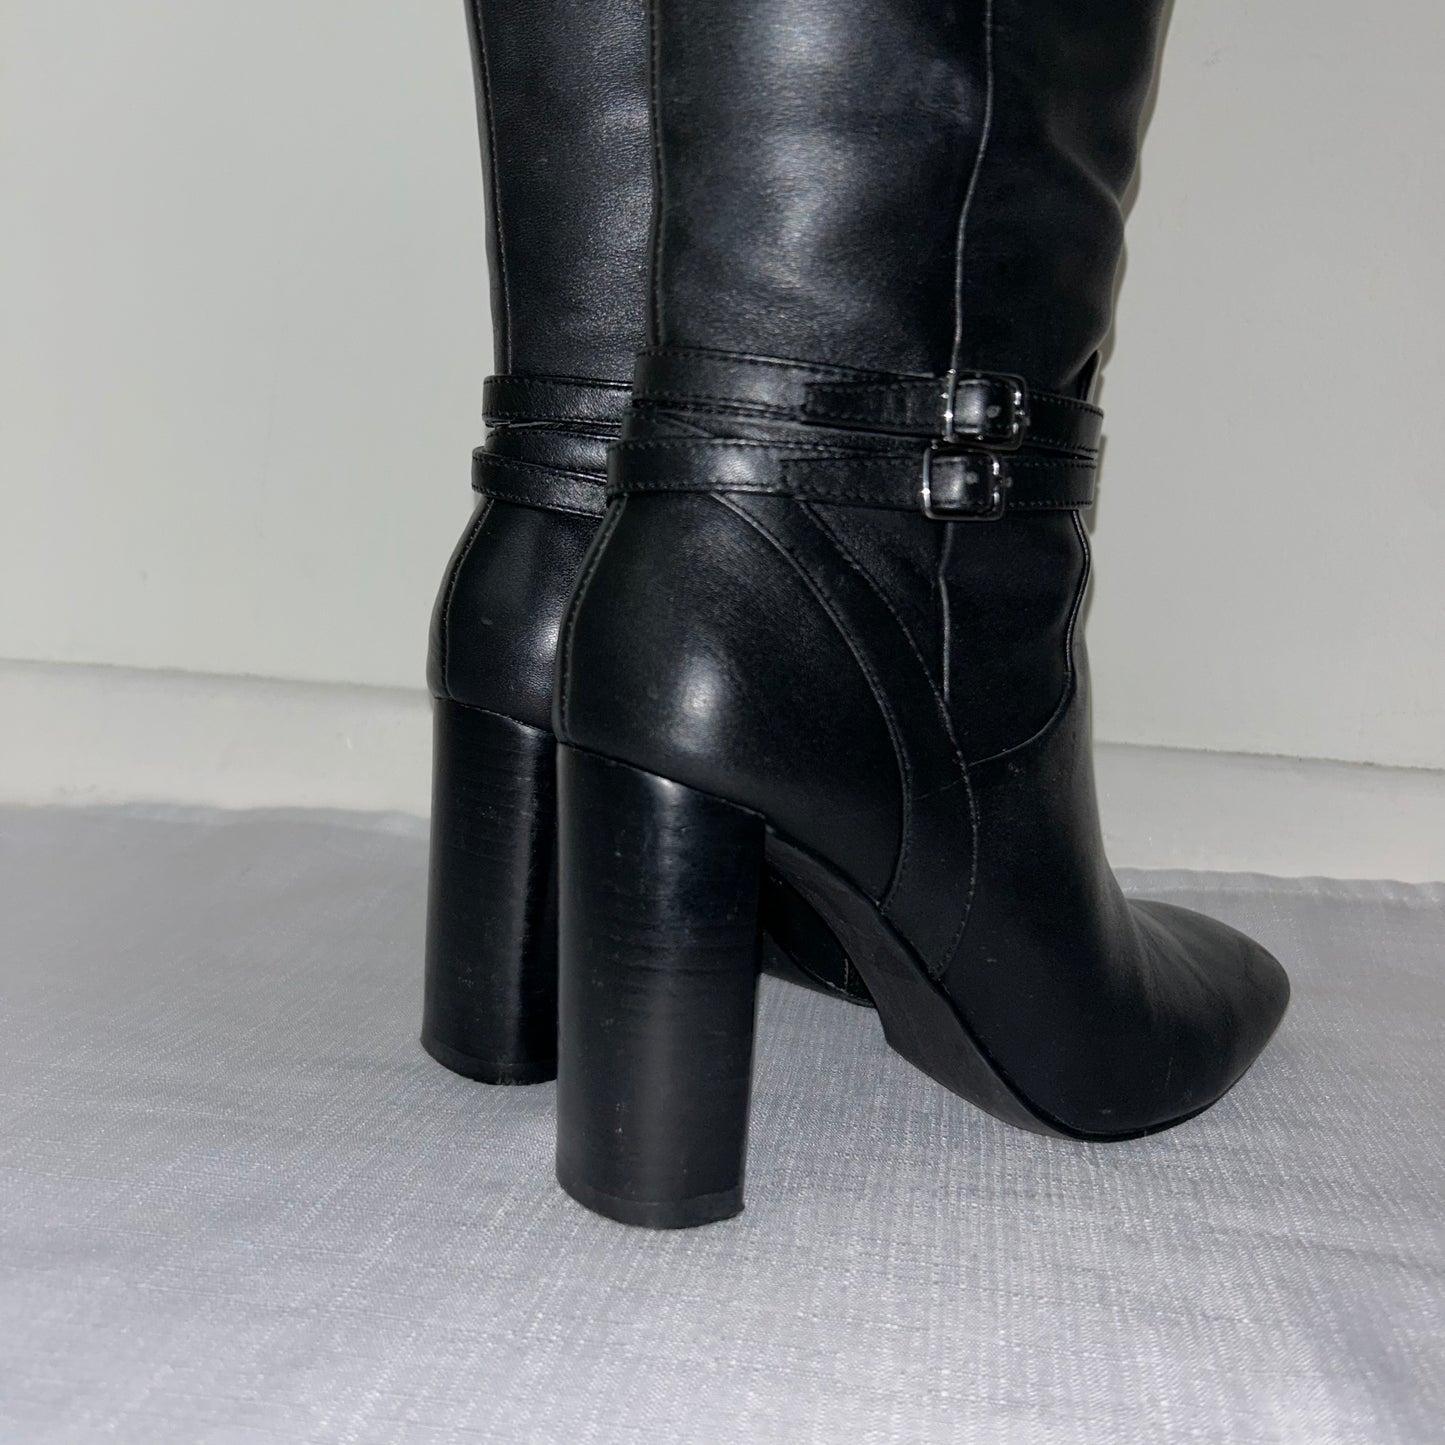 heels of black knee high boots with double silver buckle shown on a white background